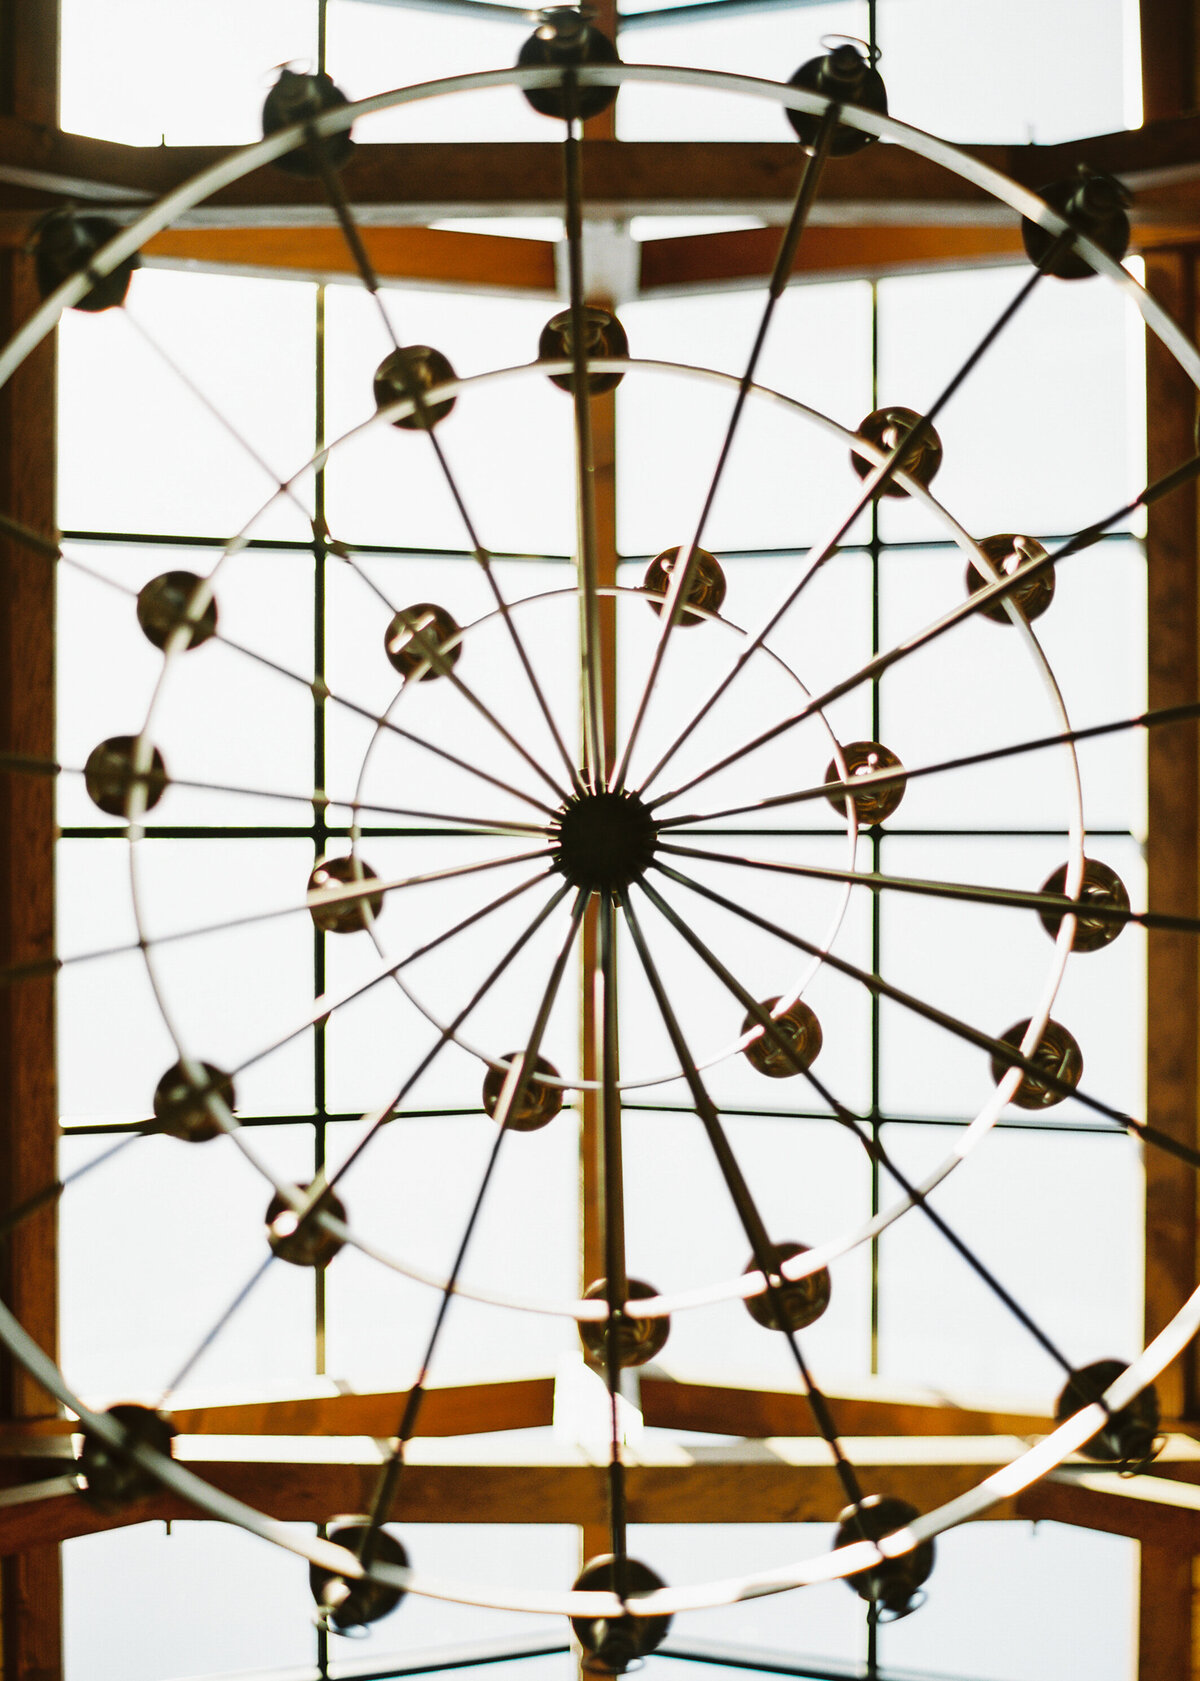 Photo of the chandelier in the Wildflower On Watts venue taken from underneath